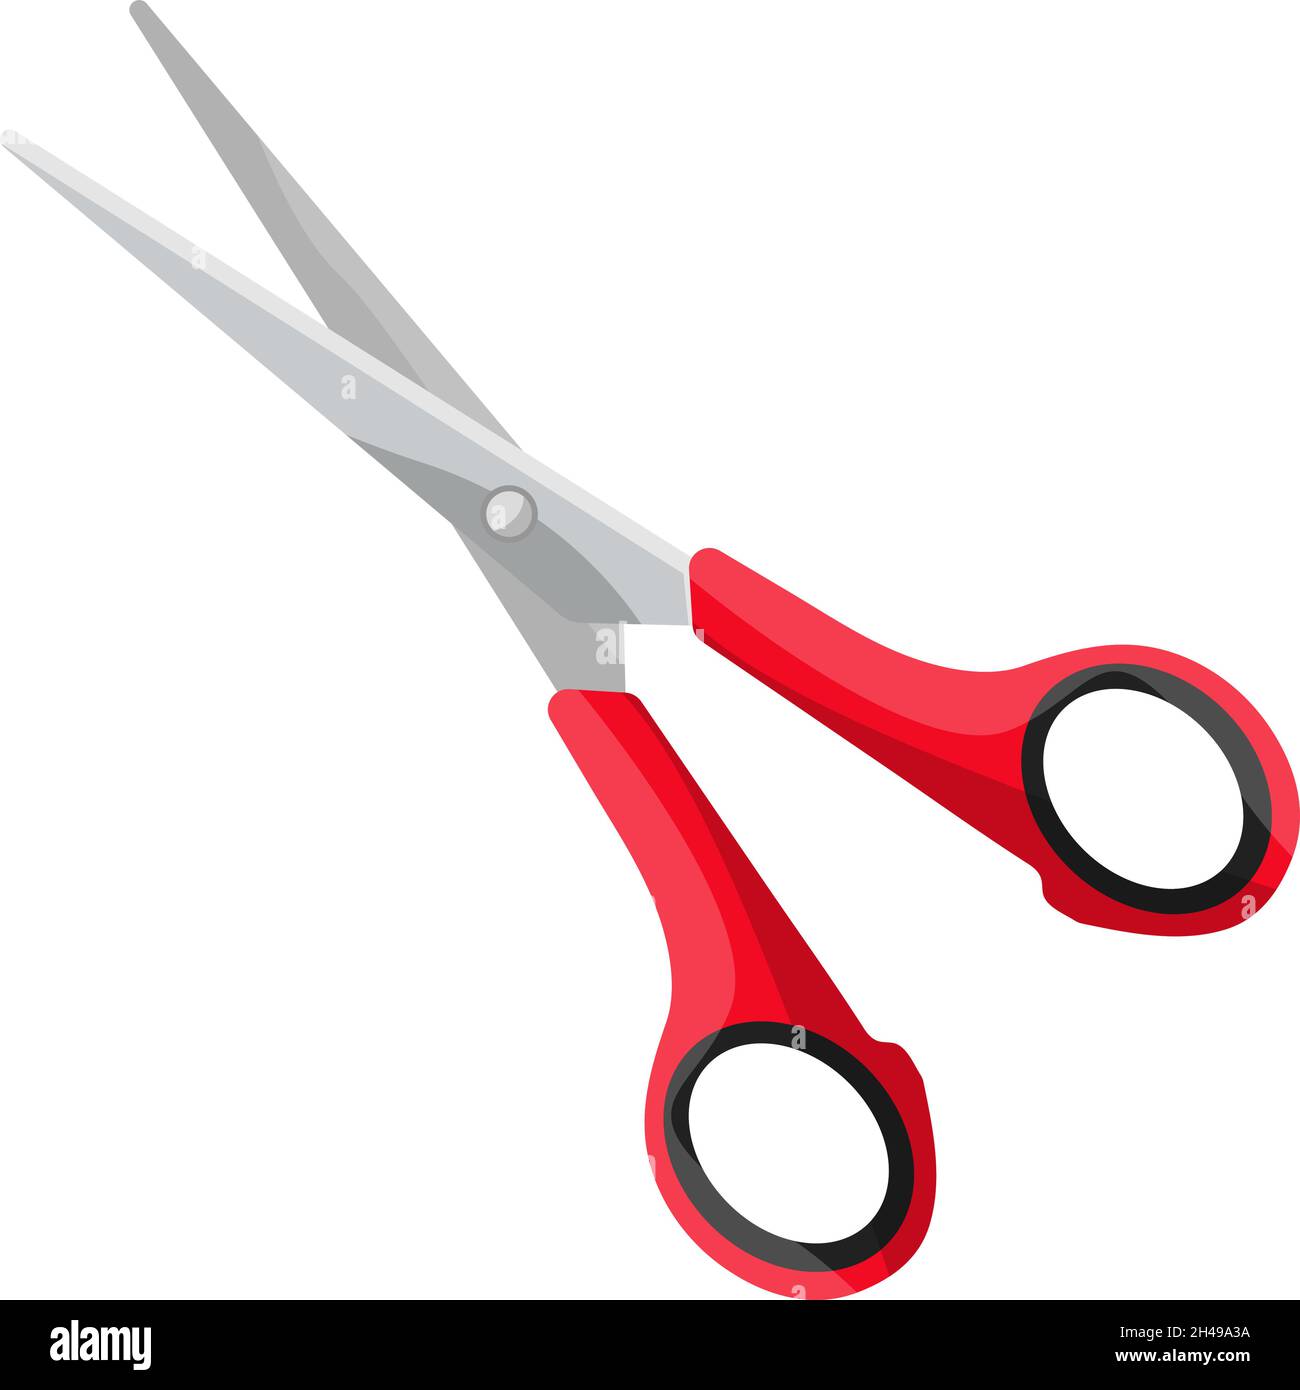 Red scissors, illustration, vector on a white background. Stock Vector